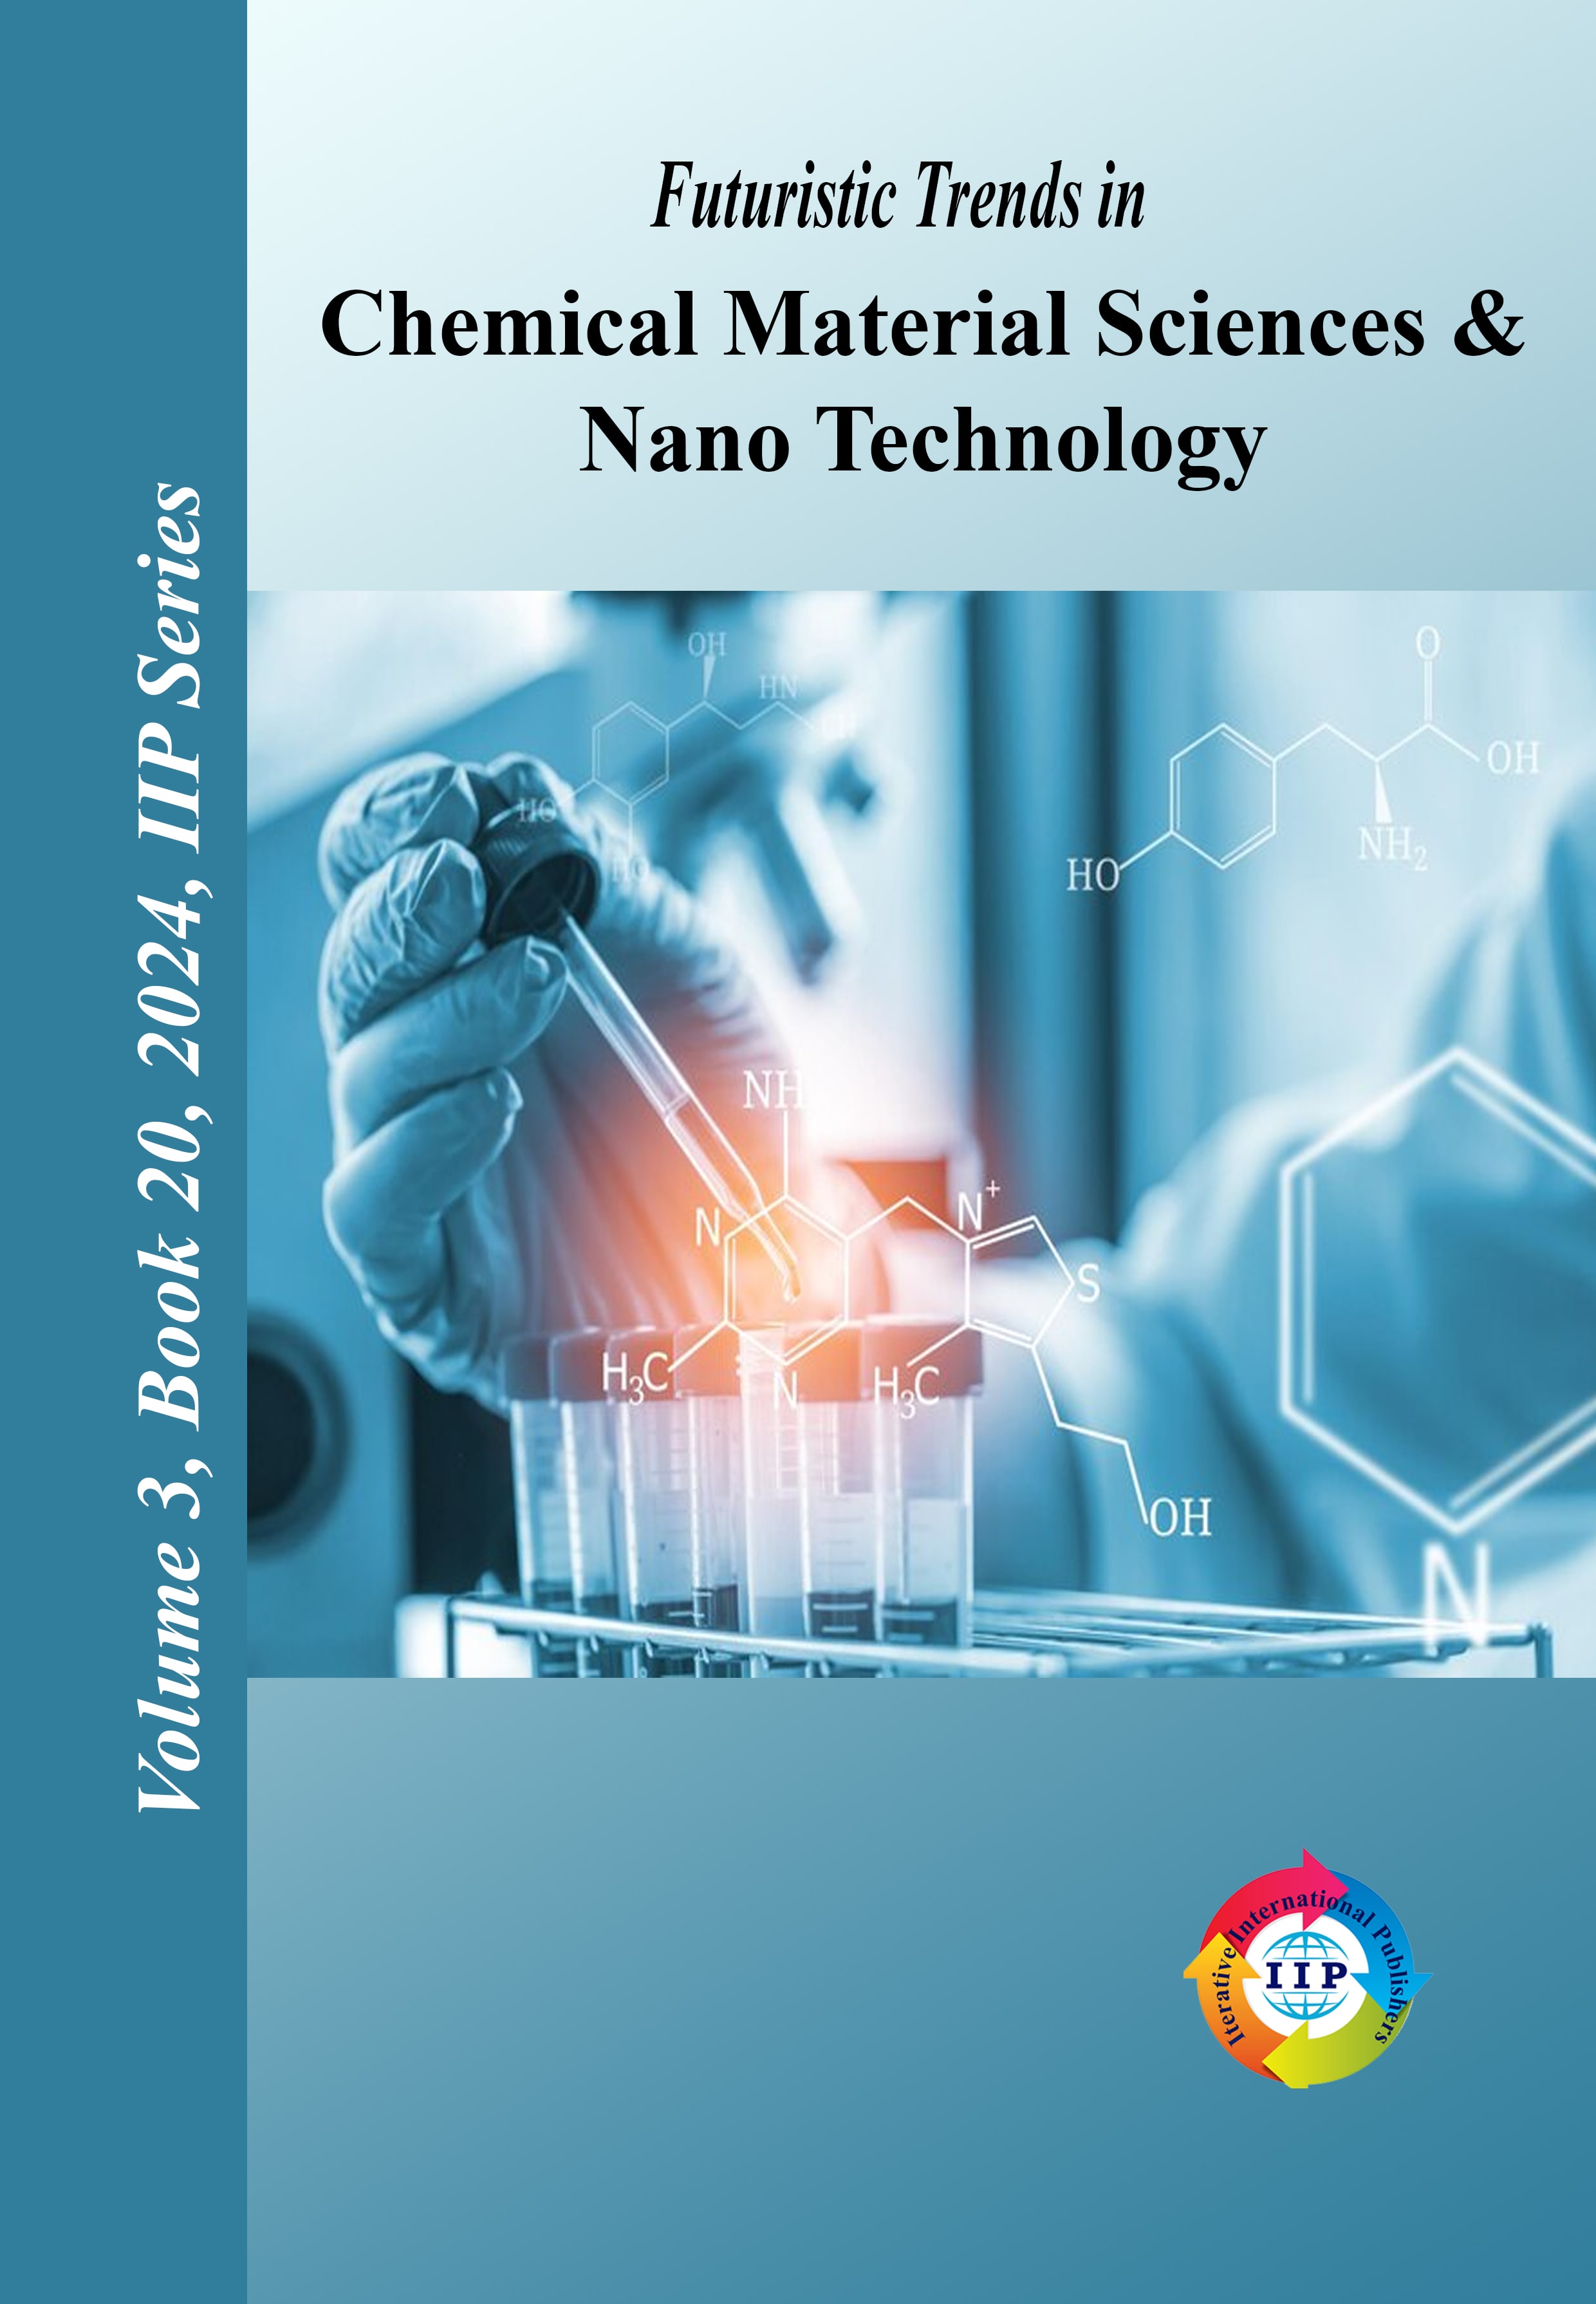 Futuristic Trends in Chemical Material Sciences & Nano Technology  Volume 3 Book 20